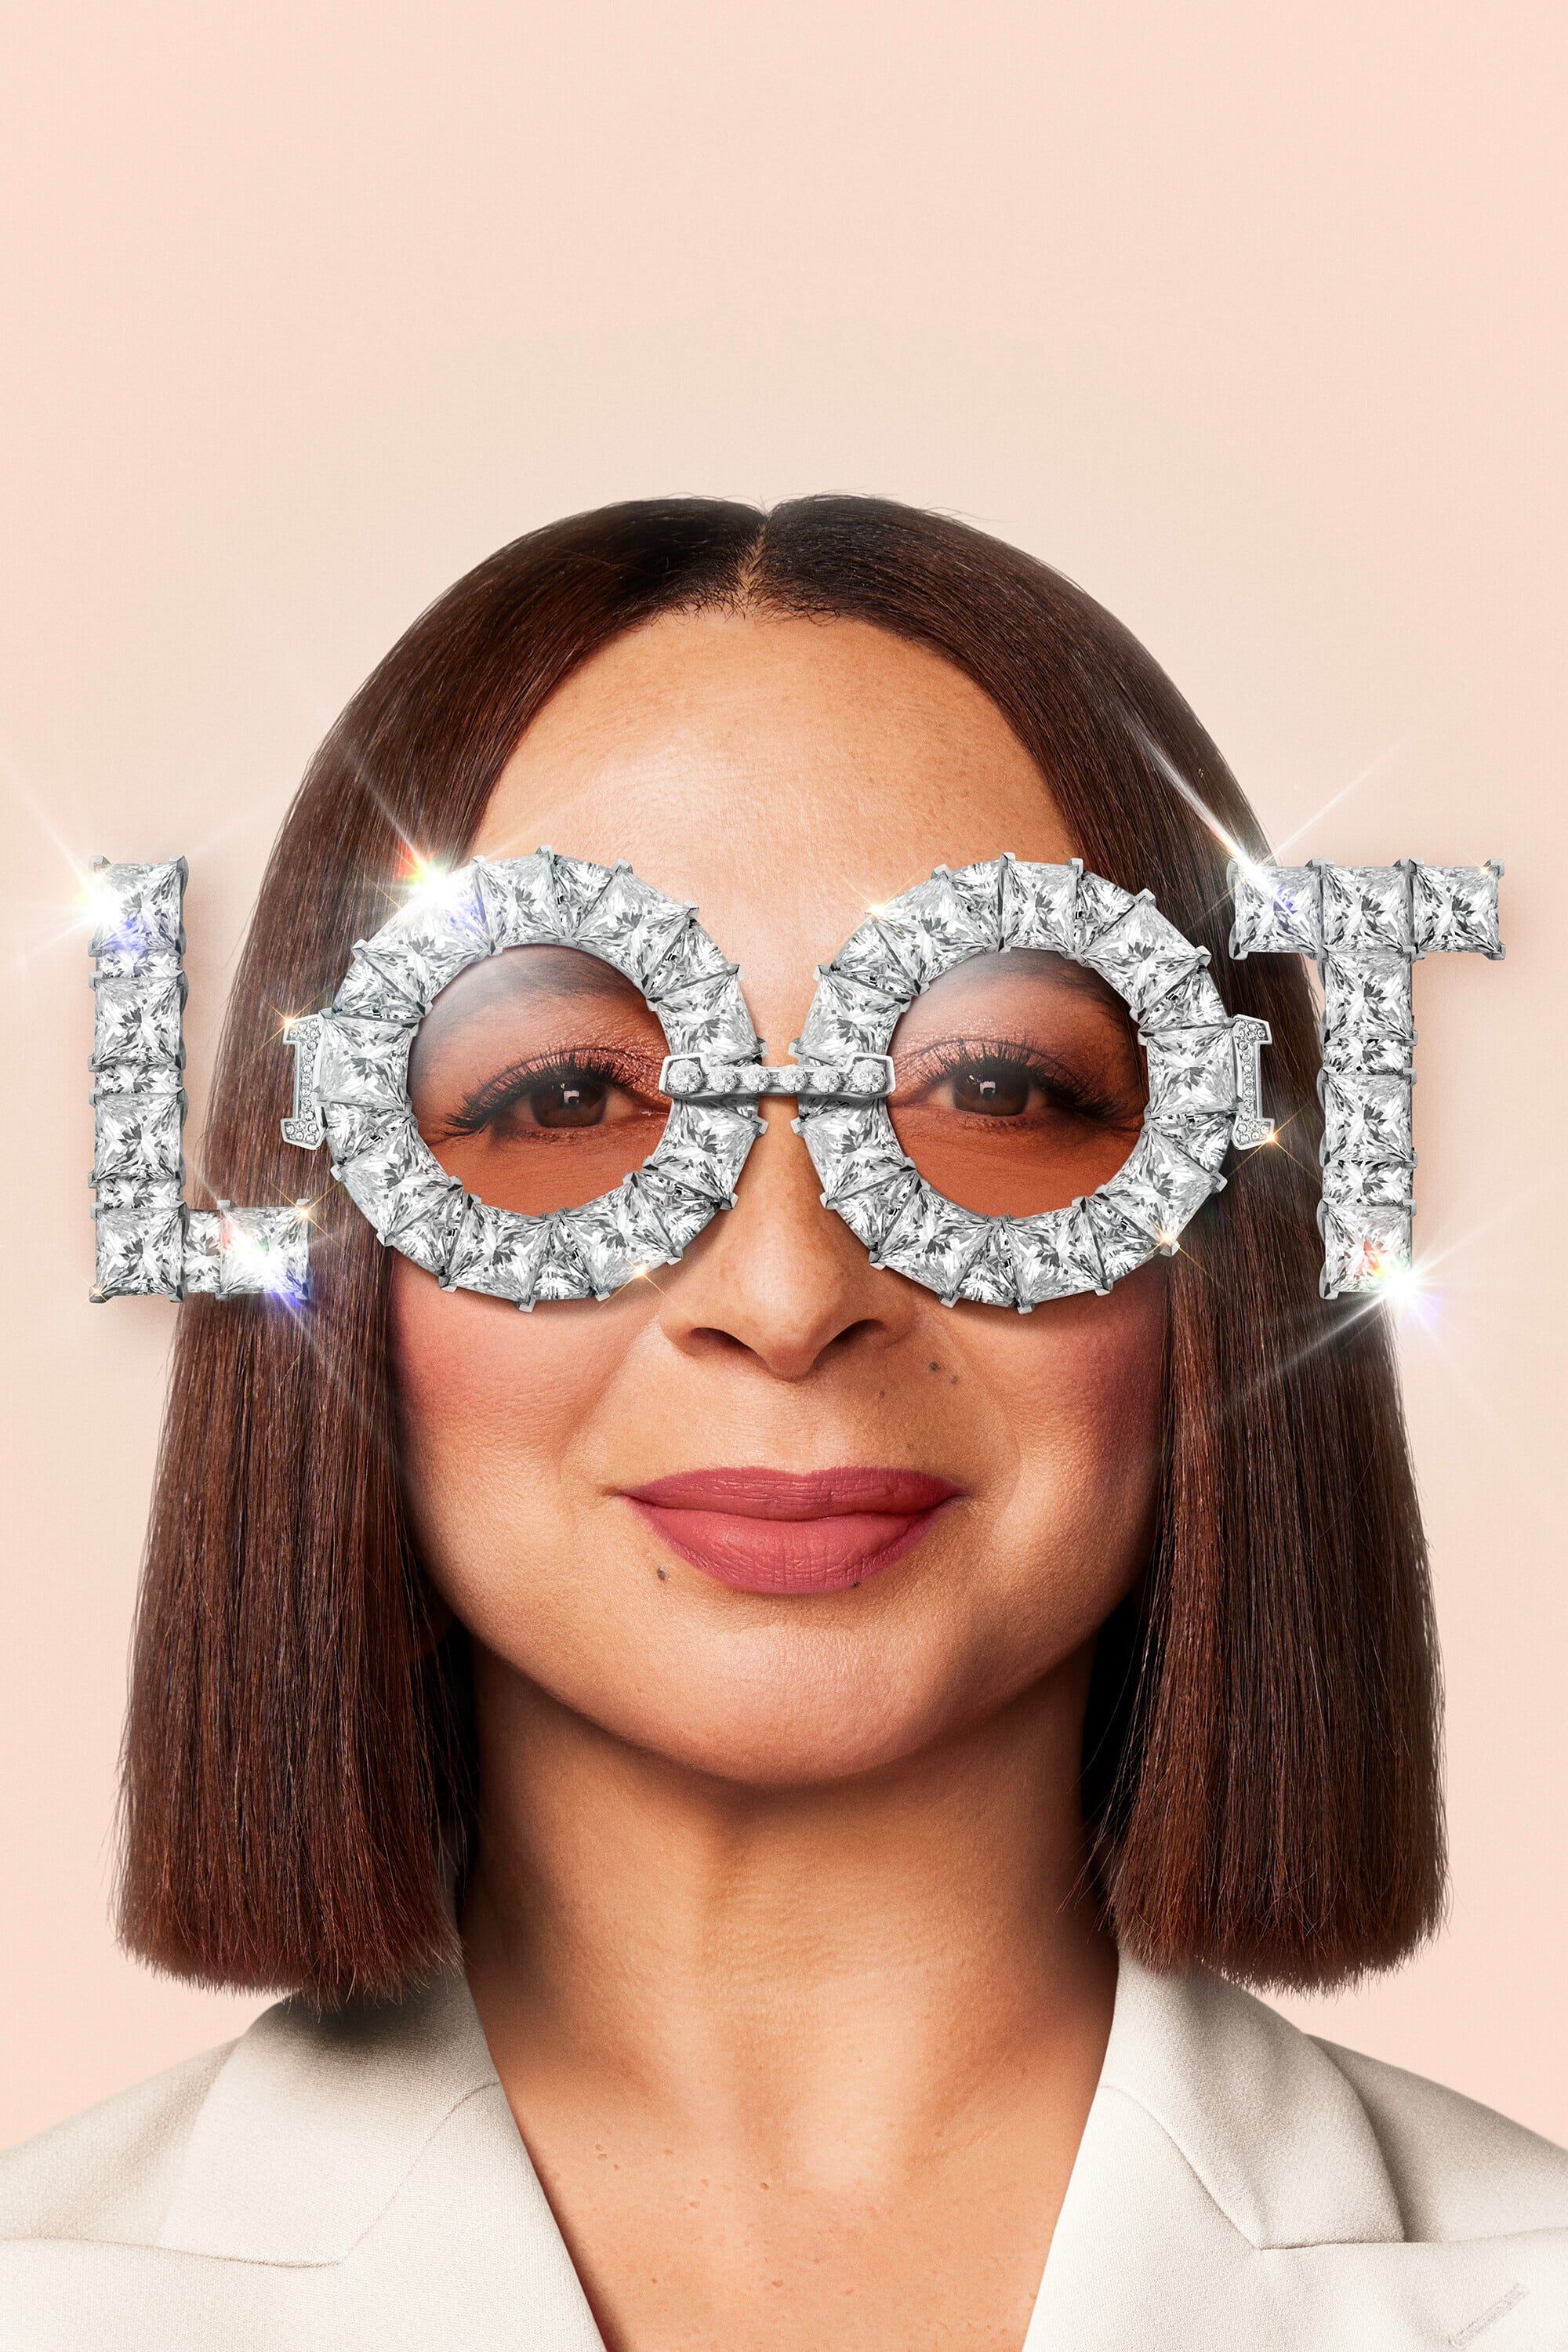 Maya Rudolph Returns As An Out Of Contact Billionaire In Equally Out Of Contact Comedy